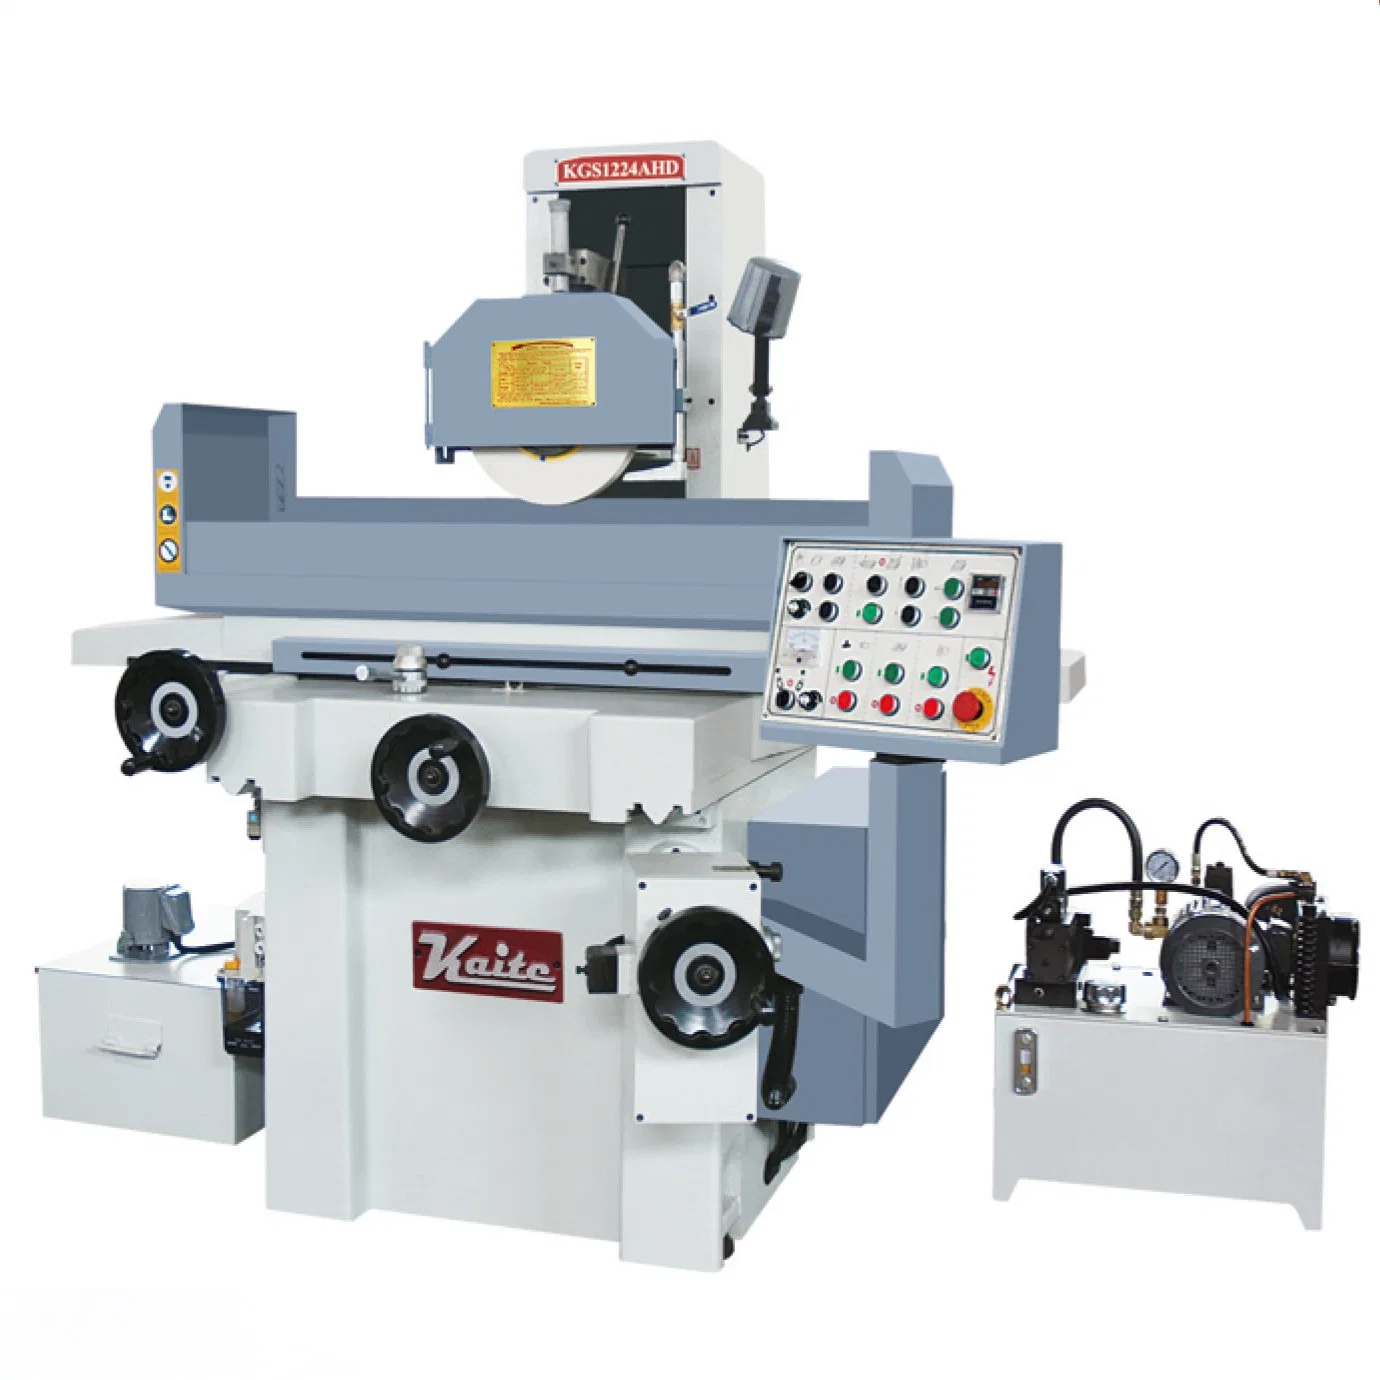 KGS1224AHD-300X600mm Three- Axis Surface Grinder Surface Grinding Machine Manufacturer